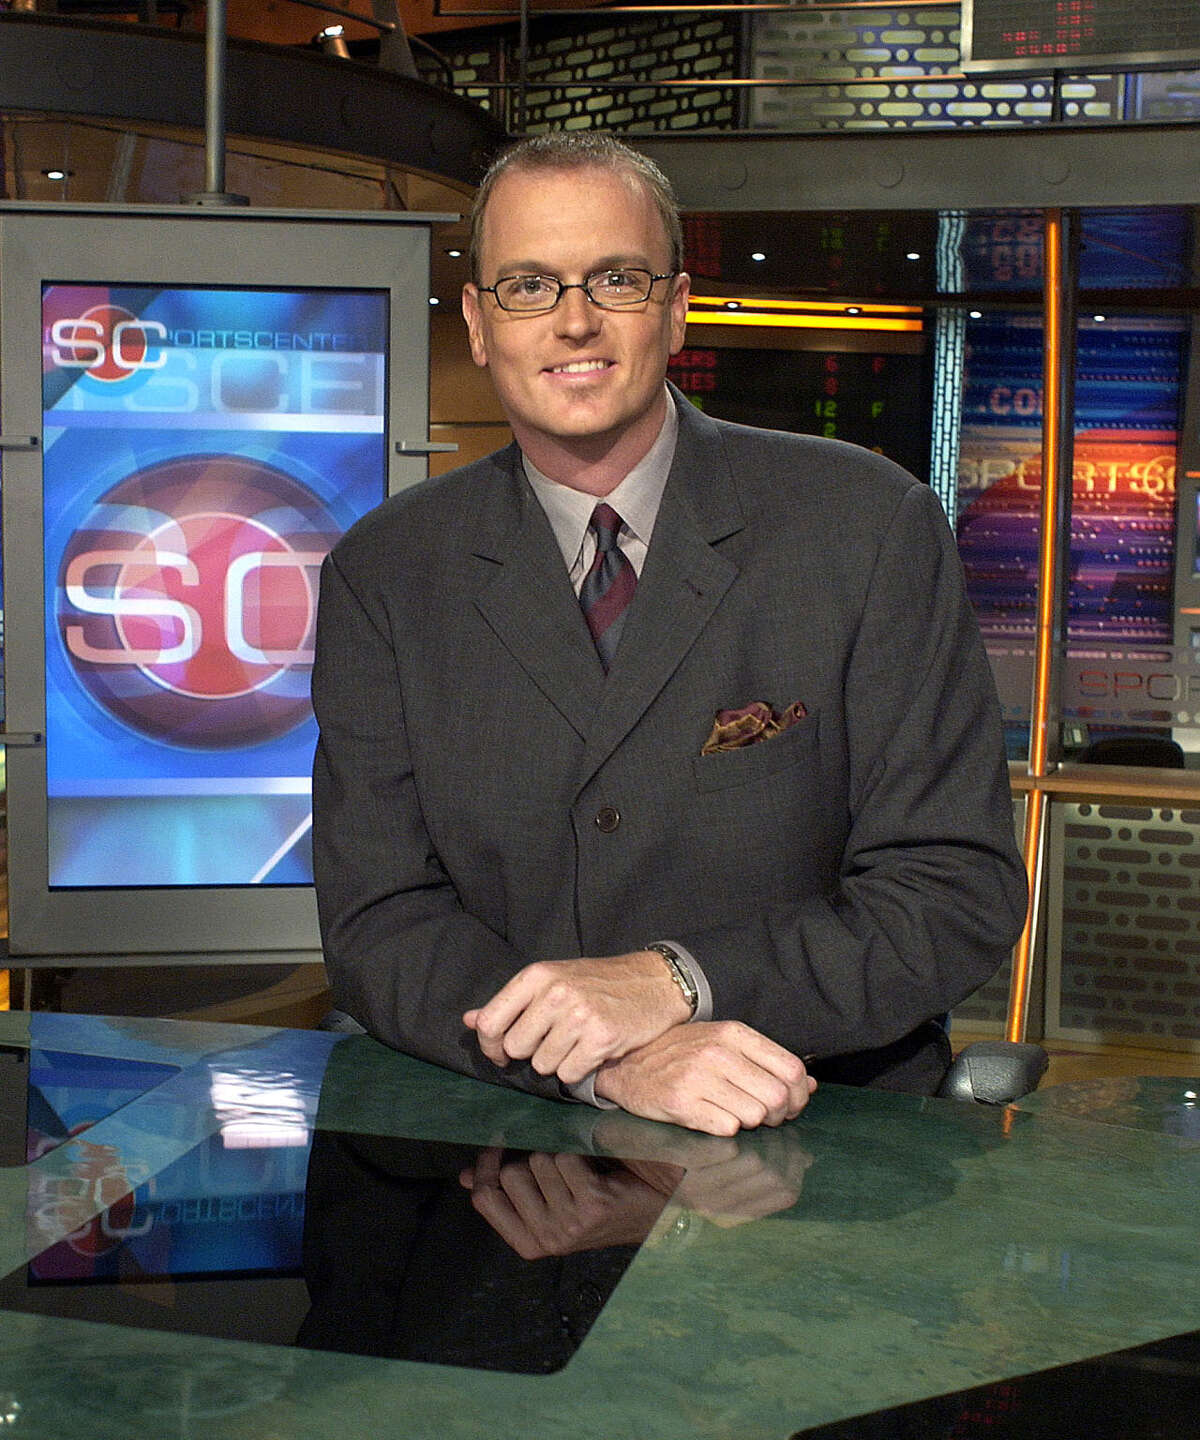 ESPN ready to air its 50,000th SportsCenter